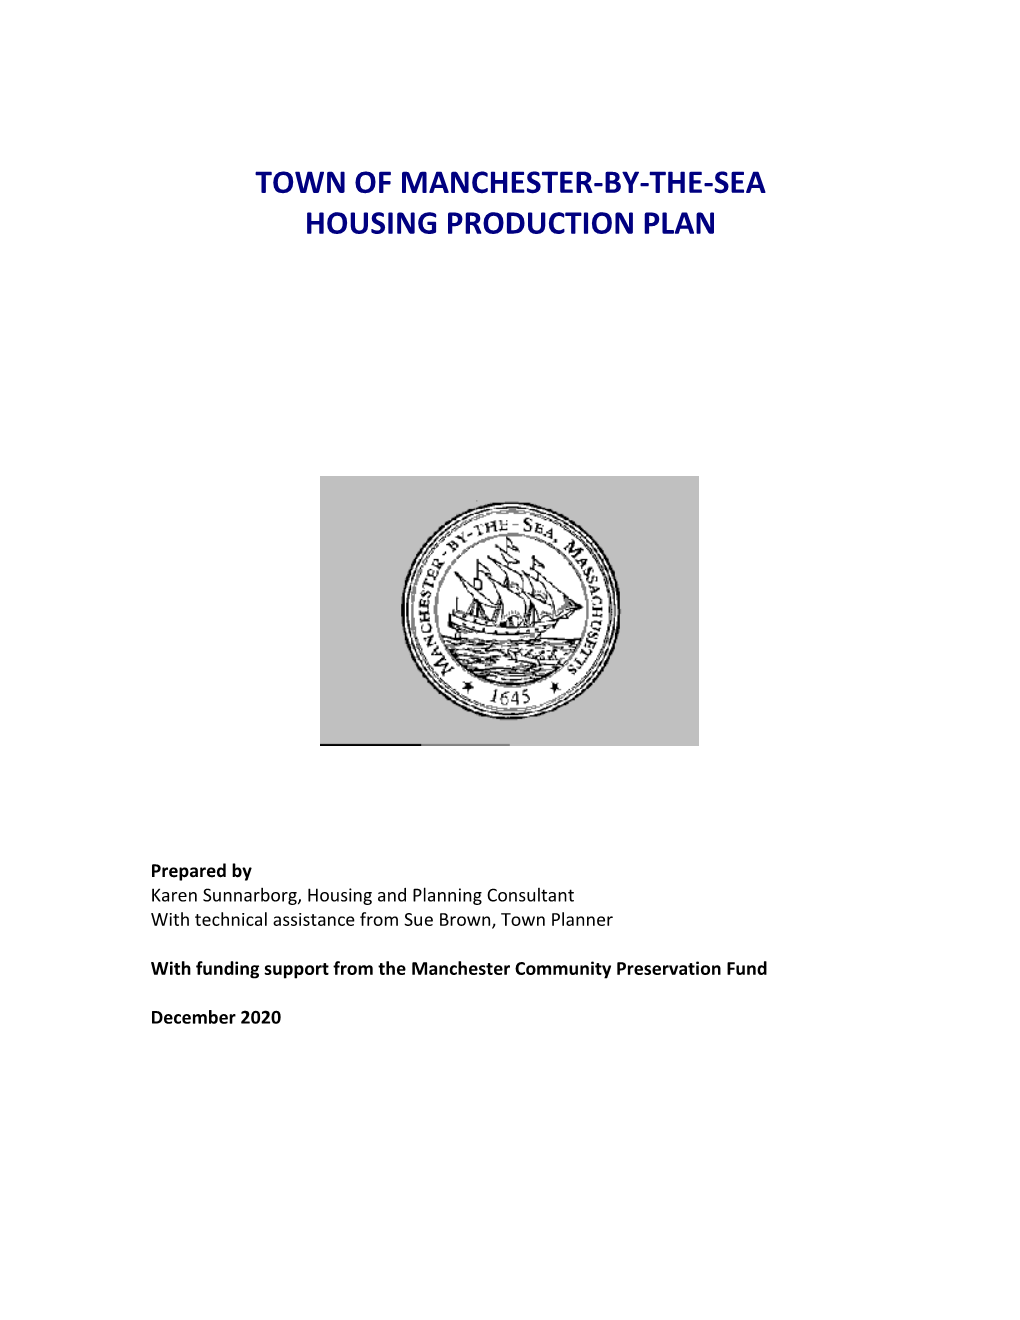 Town of Manchester-By-The-Sea Housing Production Plan